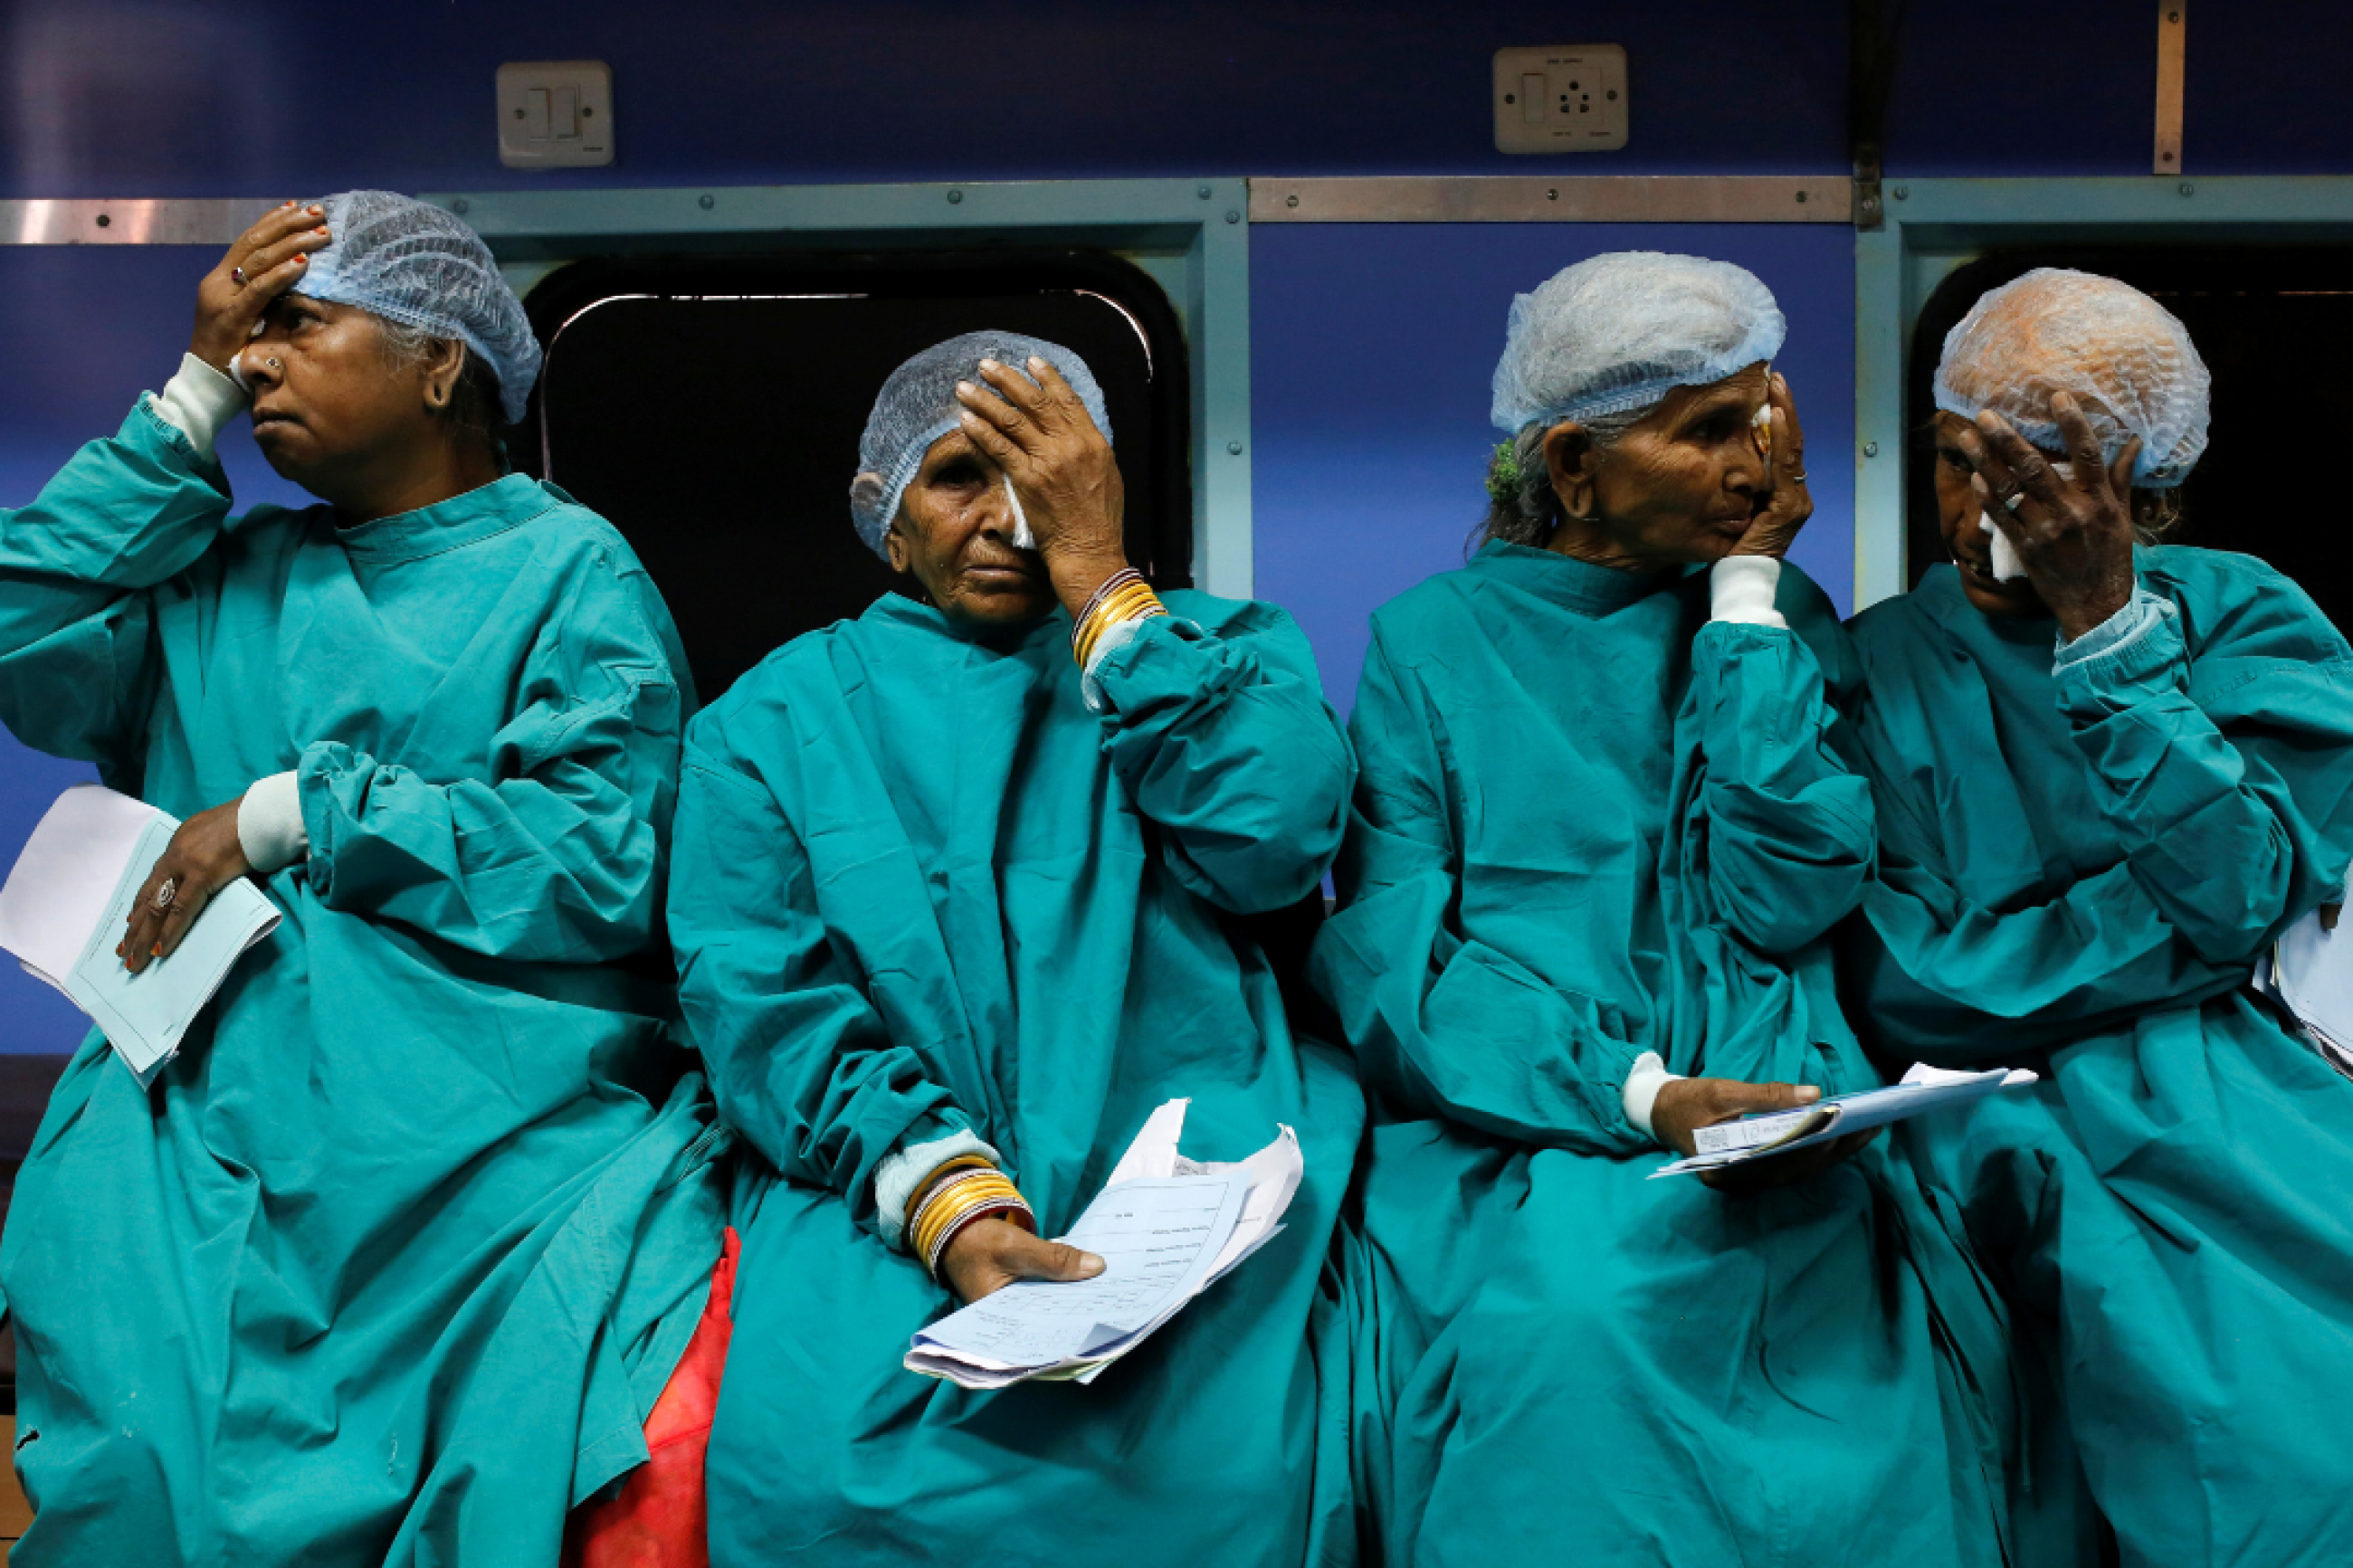 Four older patients dressed in medical gowns cover their eyes as they wait for cataract surgery on the Lifeline Express, a hospital built inside a seven-coach train, at a railway station in Jalore, India, on March 31, 2018. 